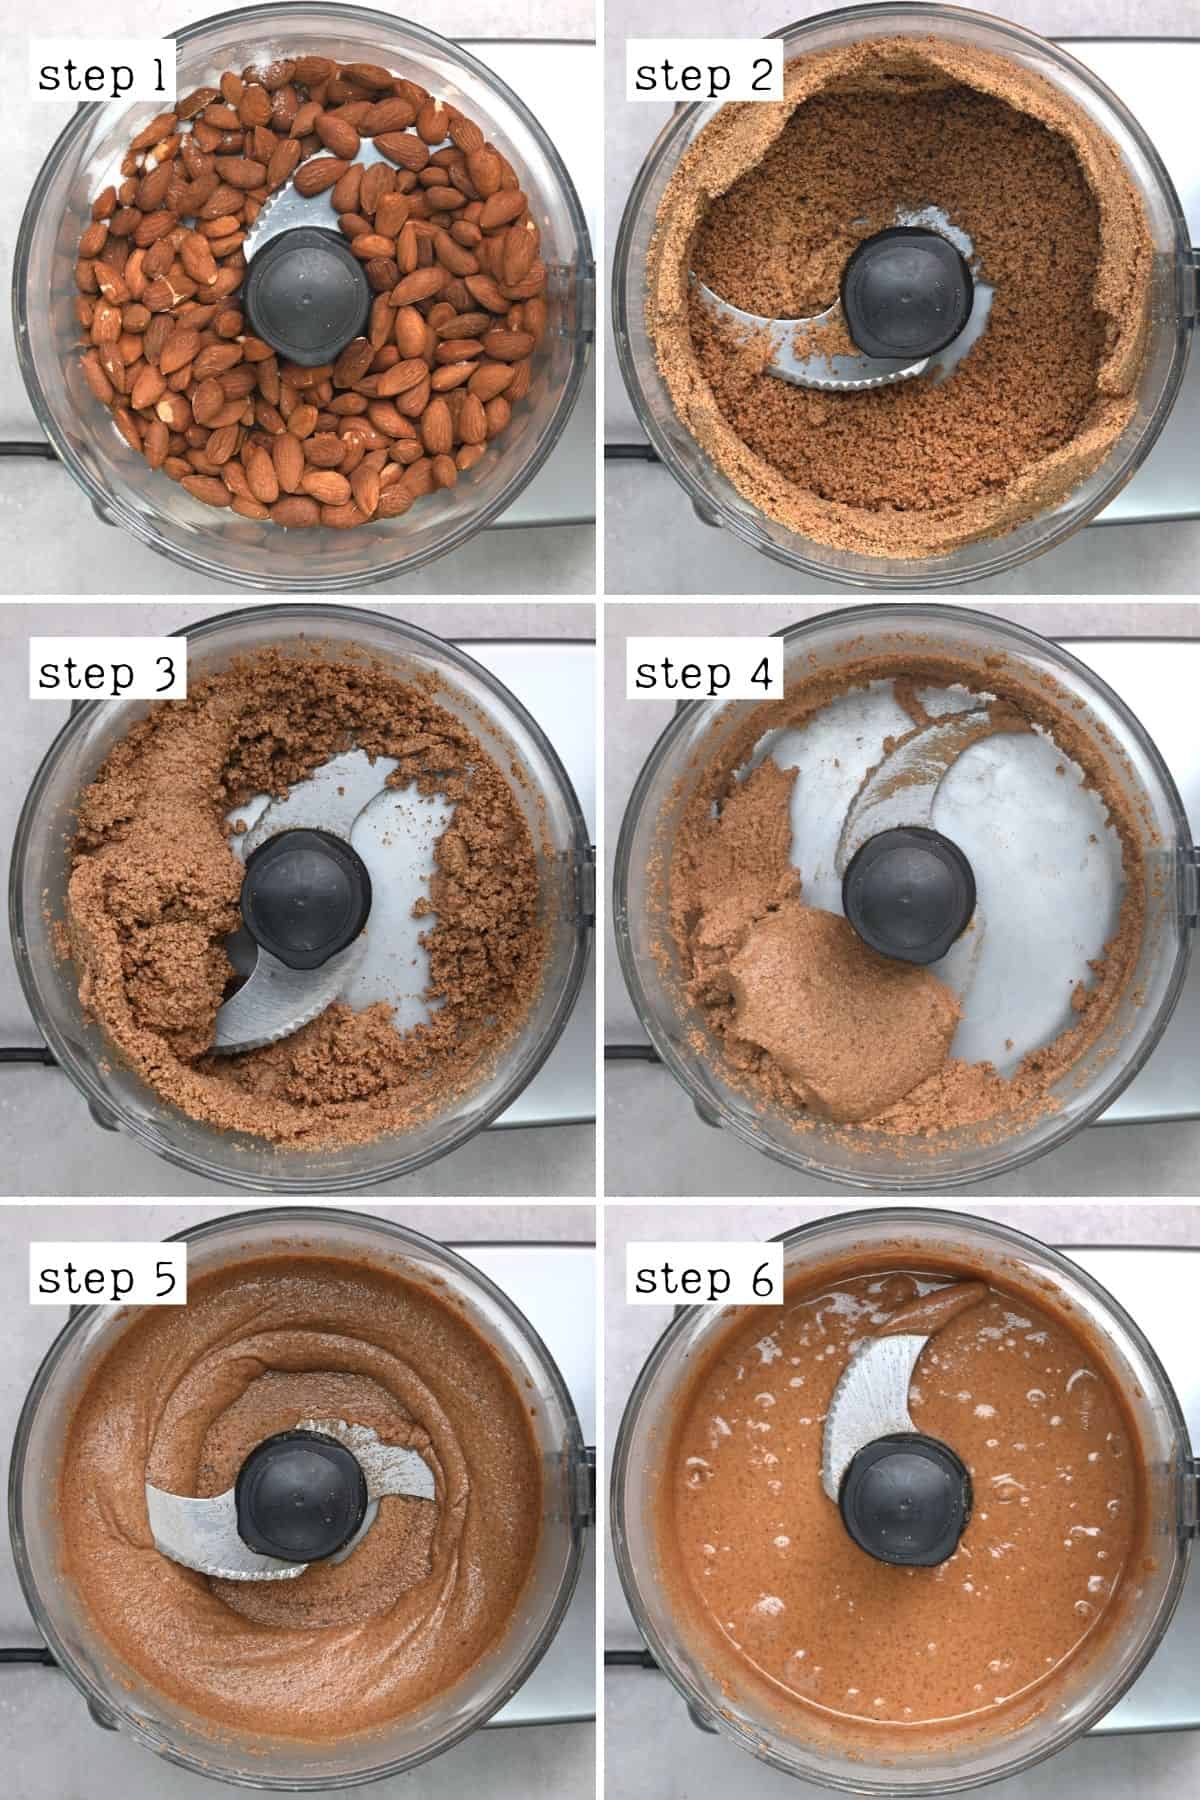 Steps for making almond butter